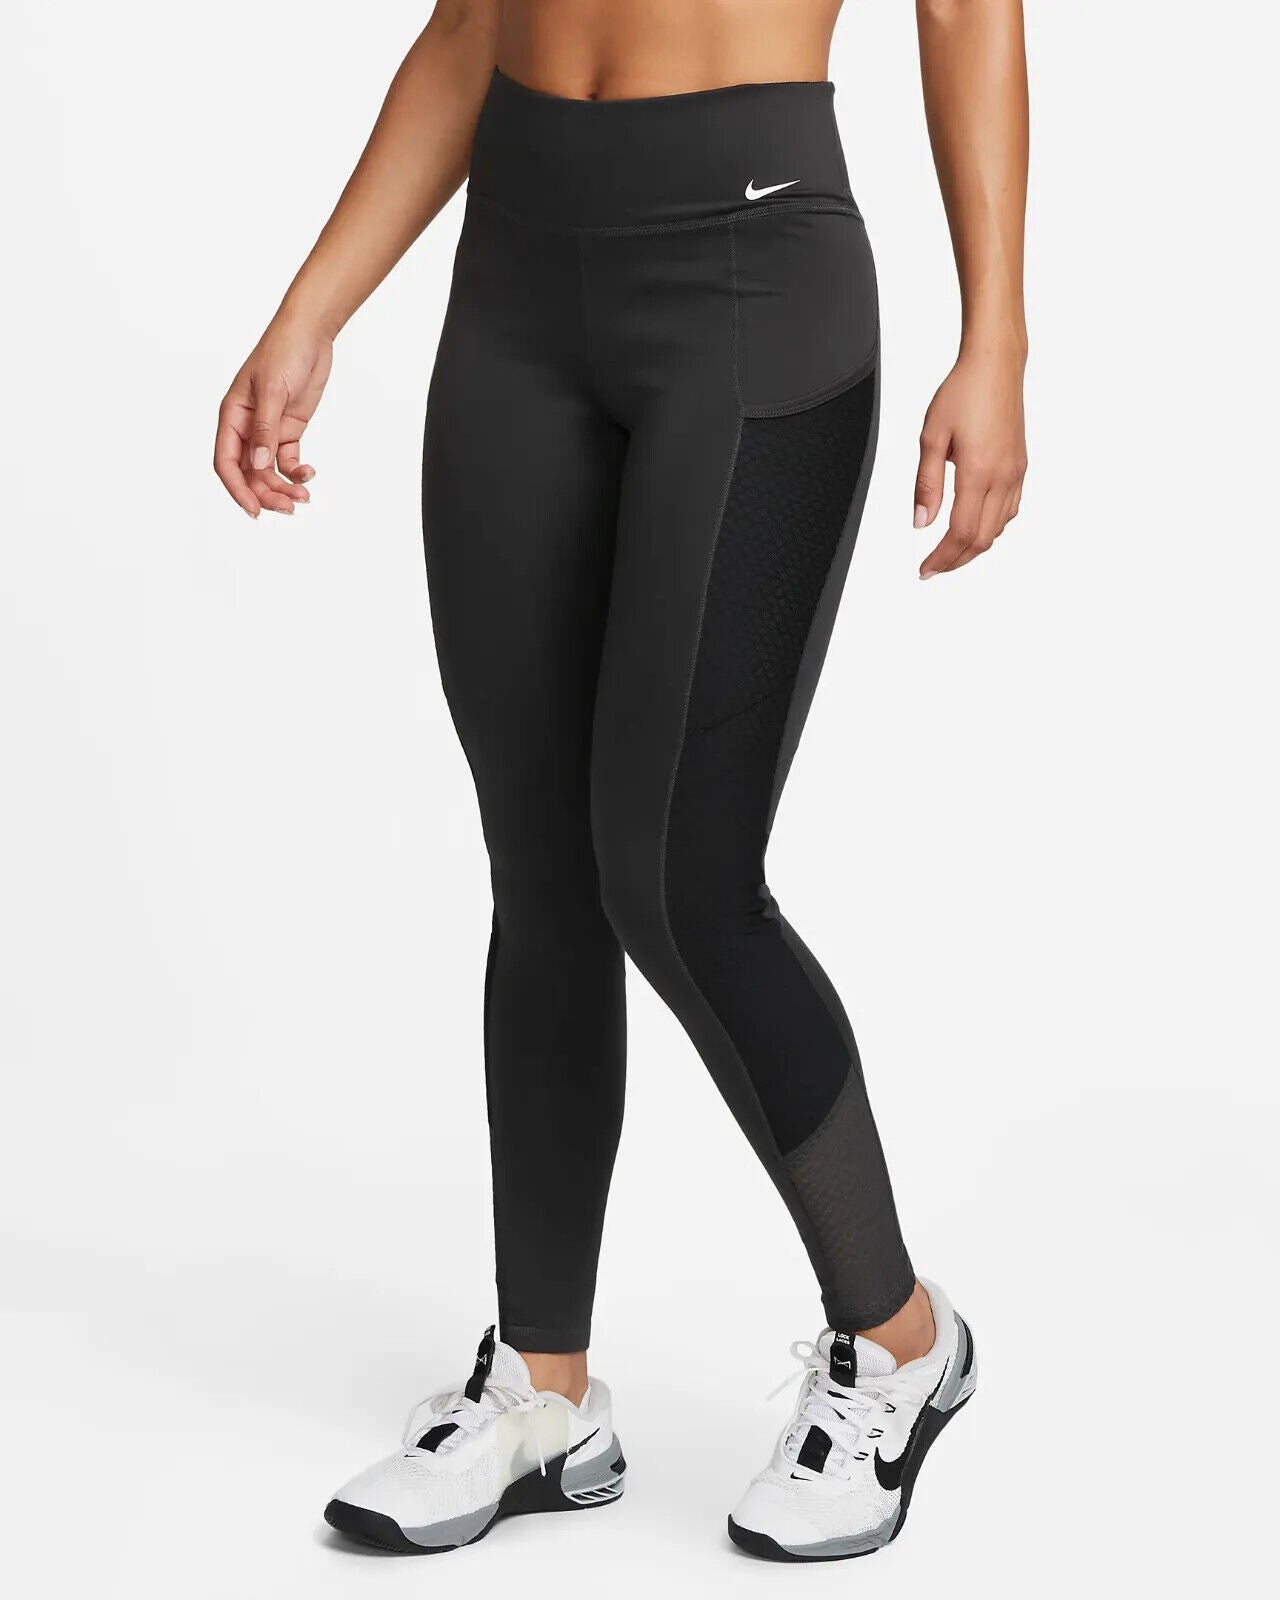 kølig Undervisning Tectonic NIKE WOMENS THERMA-FIT LEGGINGS JOGGERS JOGGING BOTTOMS RUNNING PANTS -  Weekend Sports uk